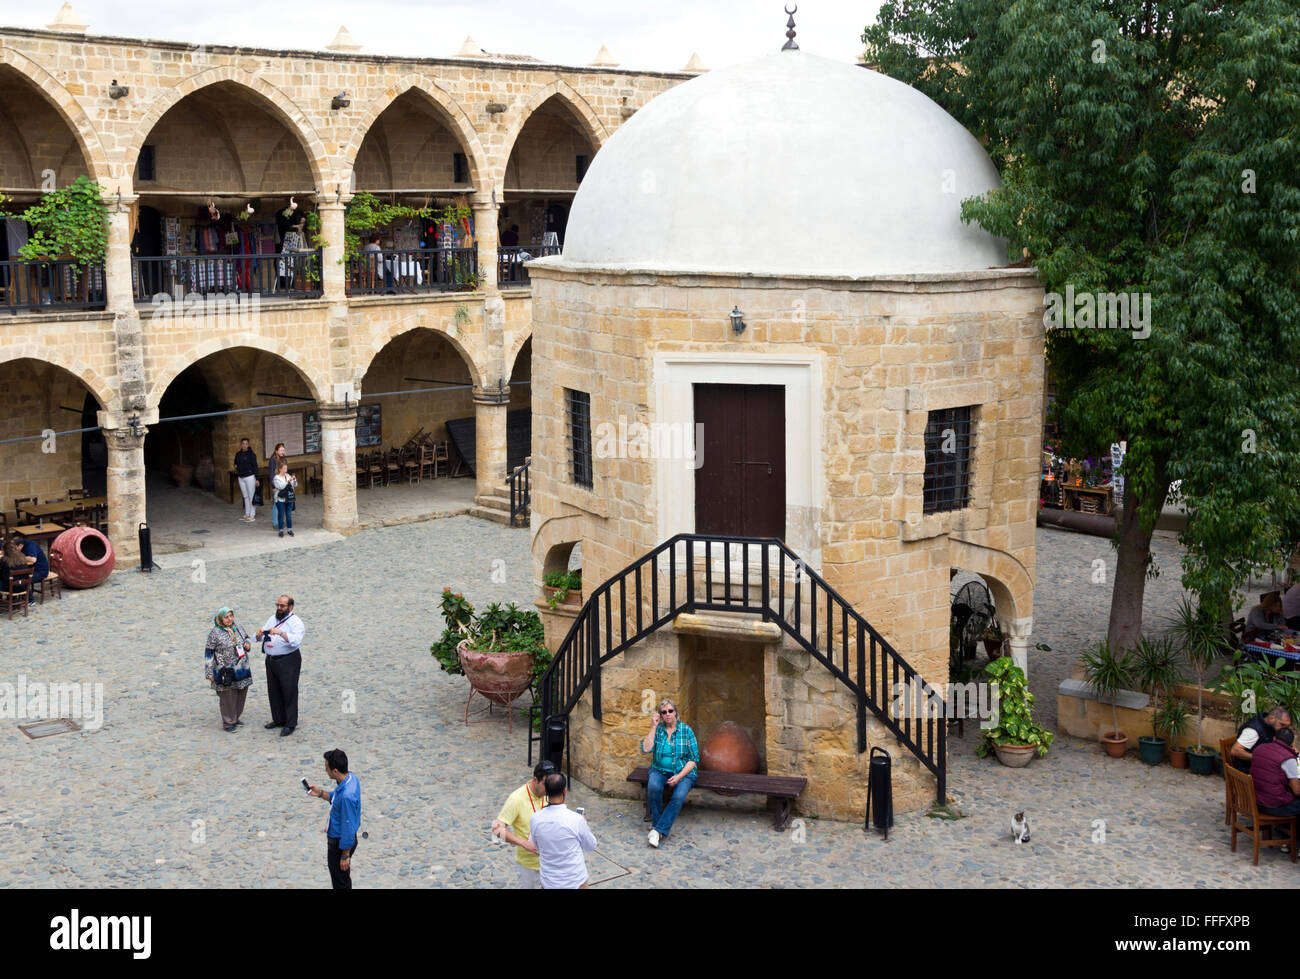 Small mosque in the center court of the Buyuk Han, in the old town, Nicosia, Lefkosa, Turkish Republic of Northern Cyprus Stock Photo